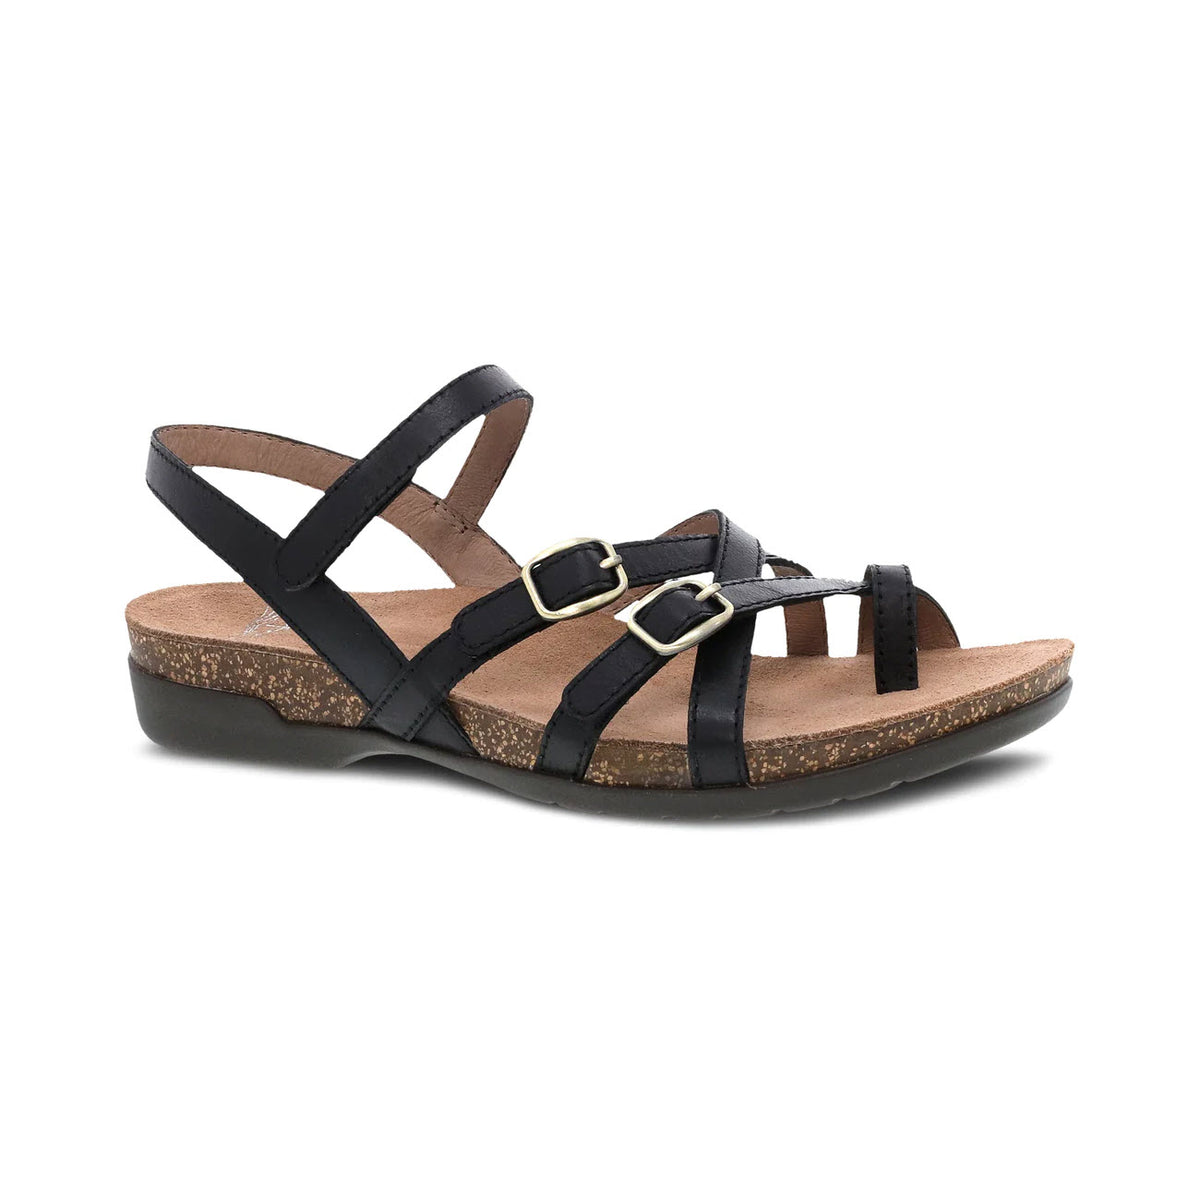 Dansko Roslyn Black supportive strappy women&#39;s sandal with buckle detail on a white background.